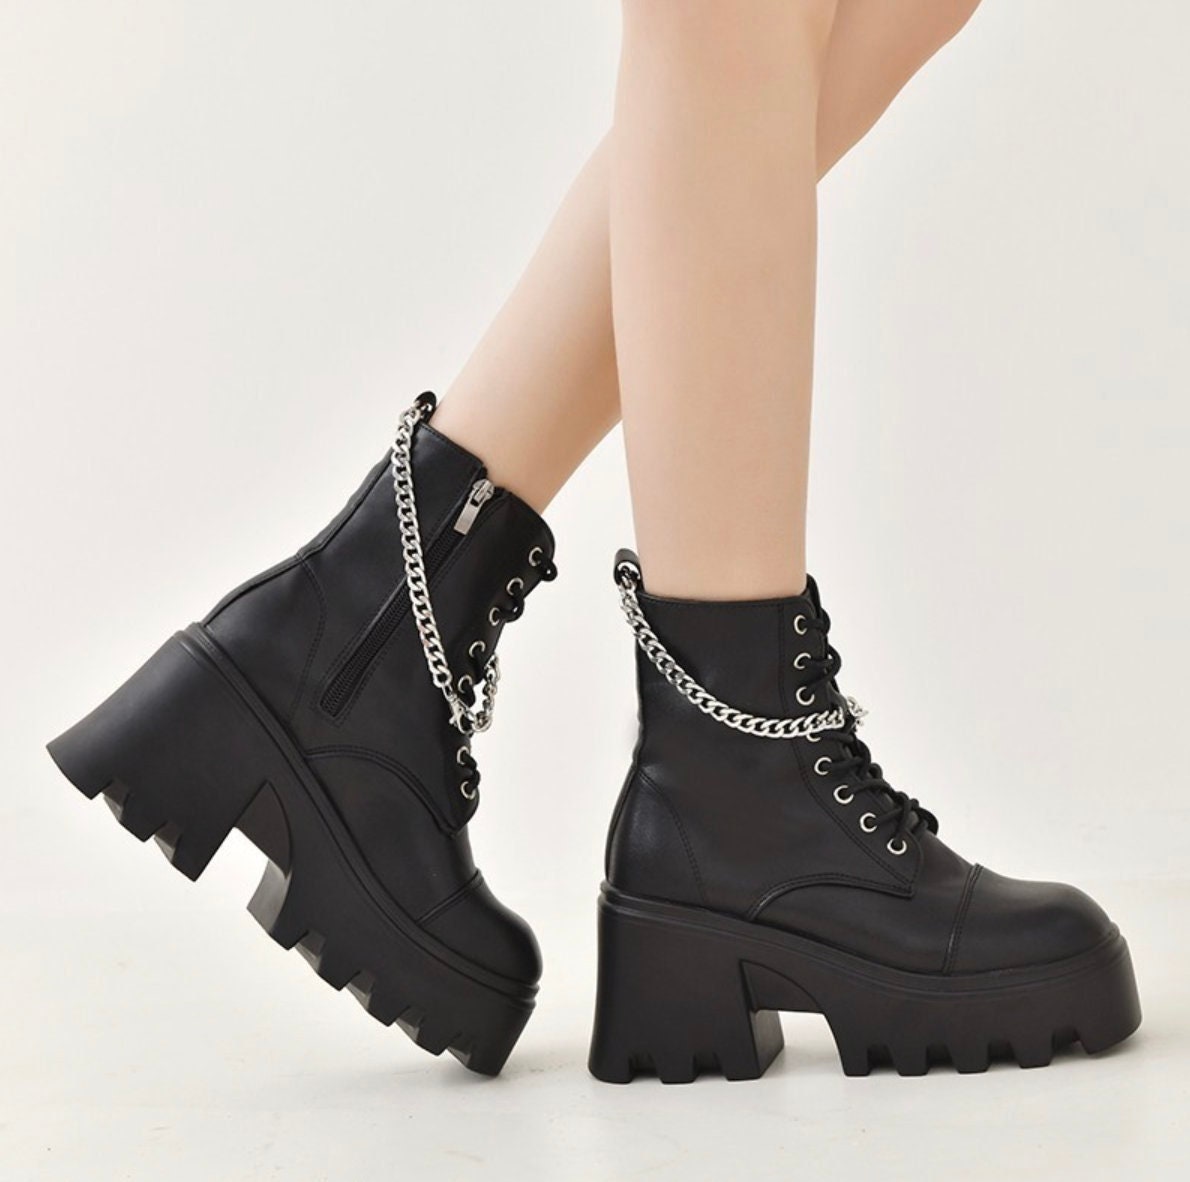 Y2K Square Heel Boots with Thick Soles - Black Faux Leather Ankle Boot